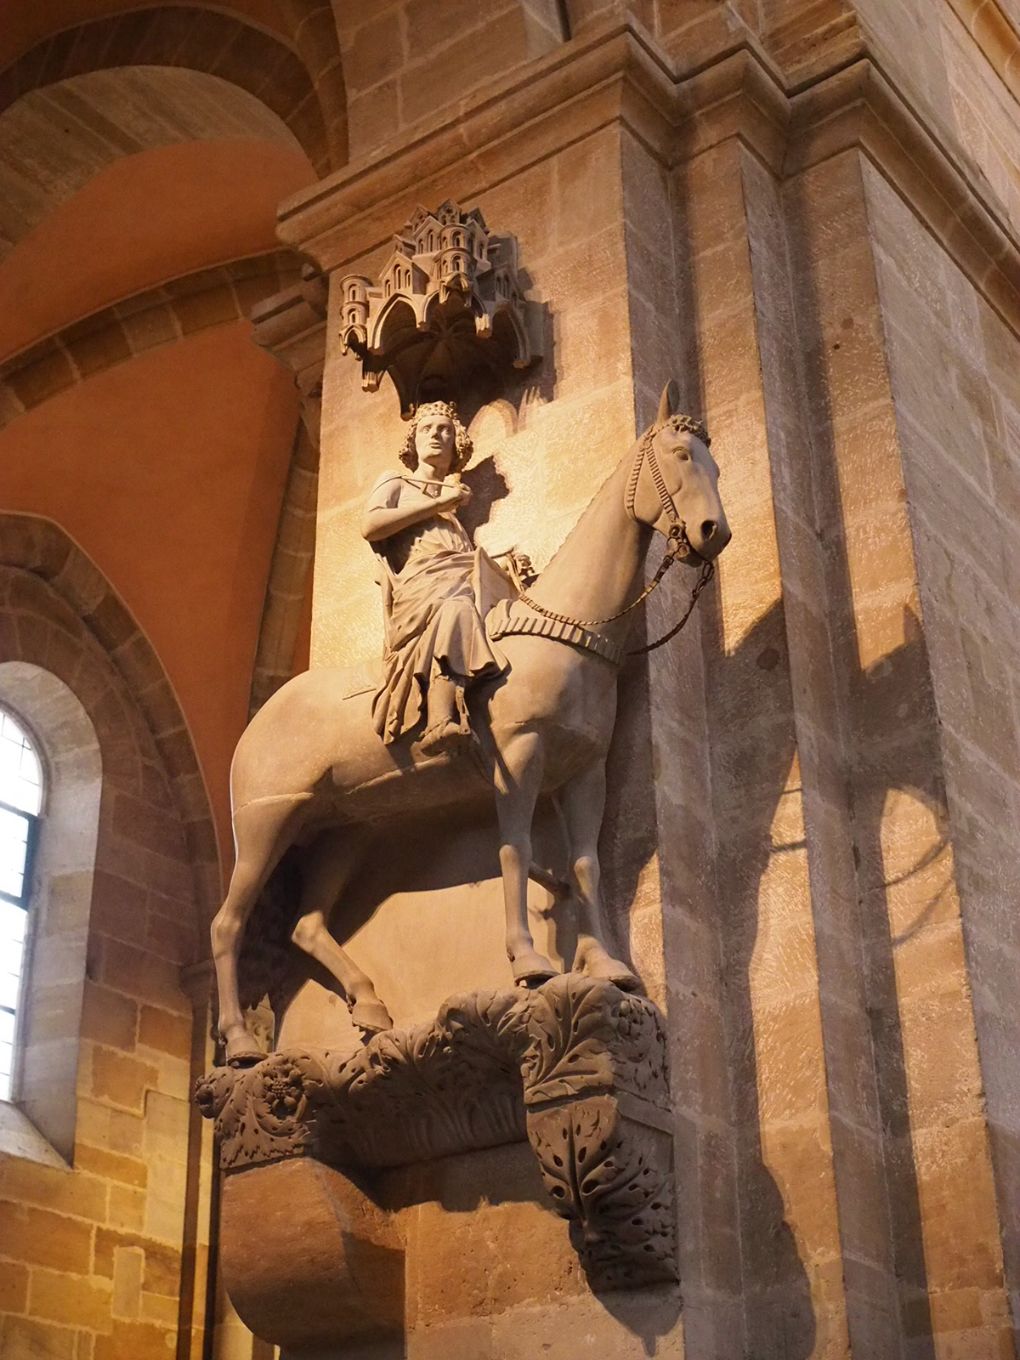 A large tan statue of a mounted knight on a horse is affixed to the side of a column in a cathedral, he is wearing a crown and gazes serenely over the viewer's head, the horse is shown lifesized.